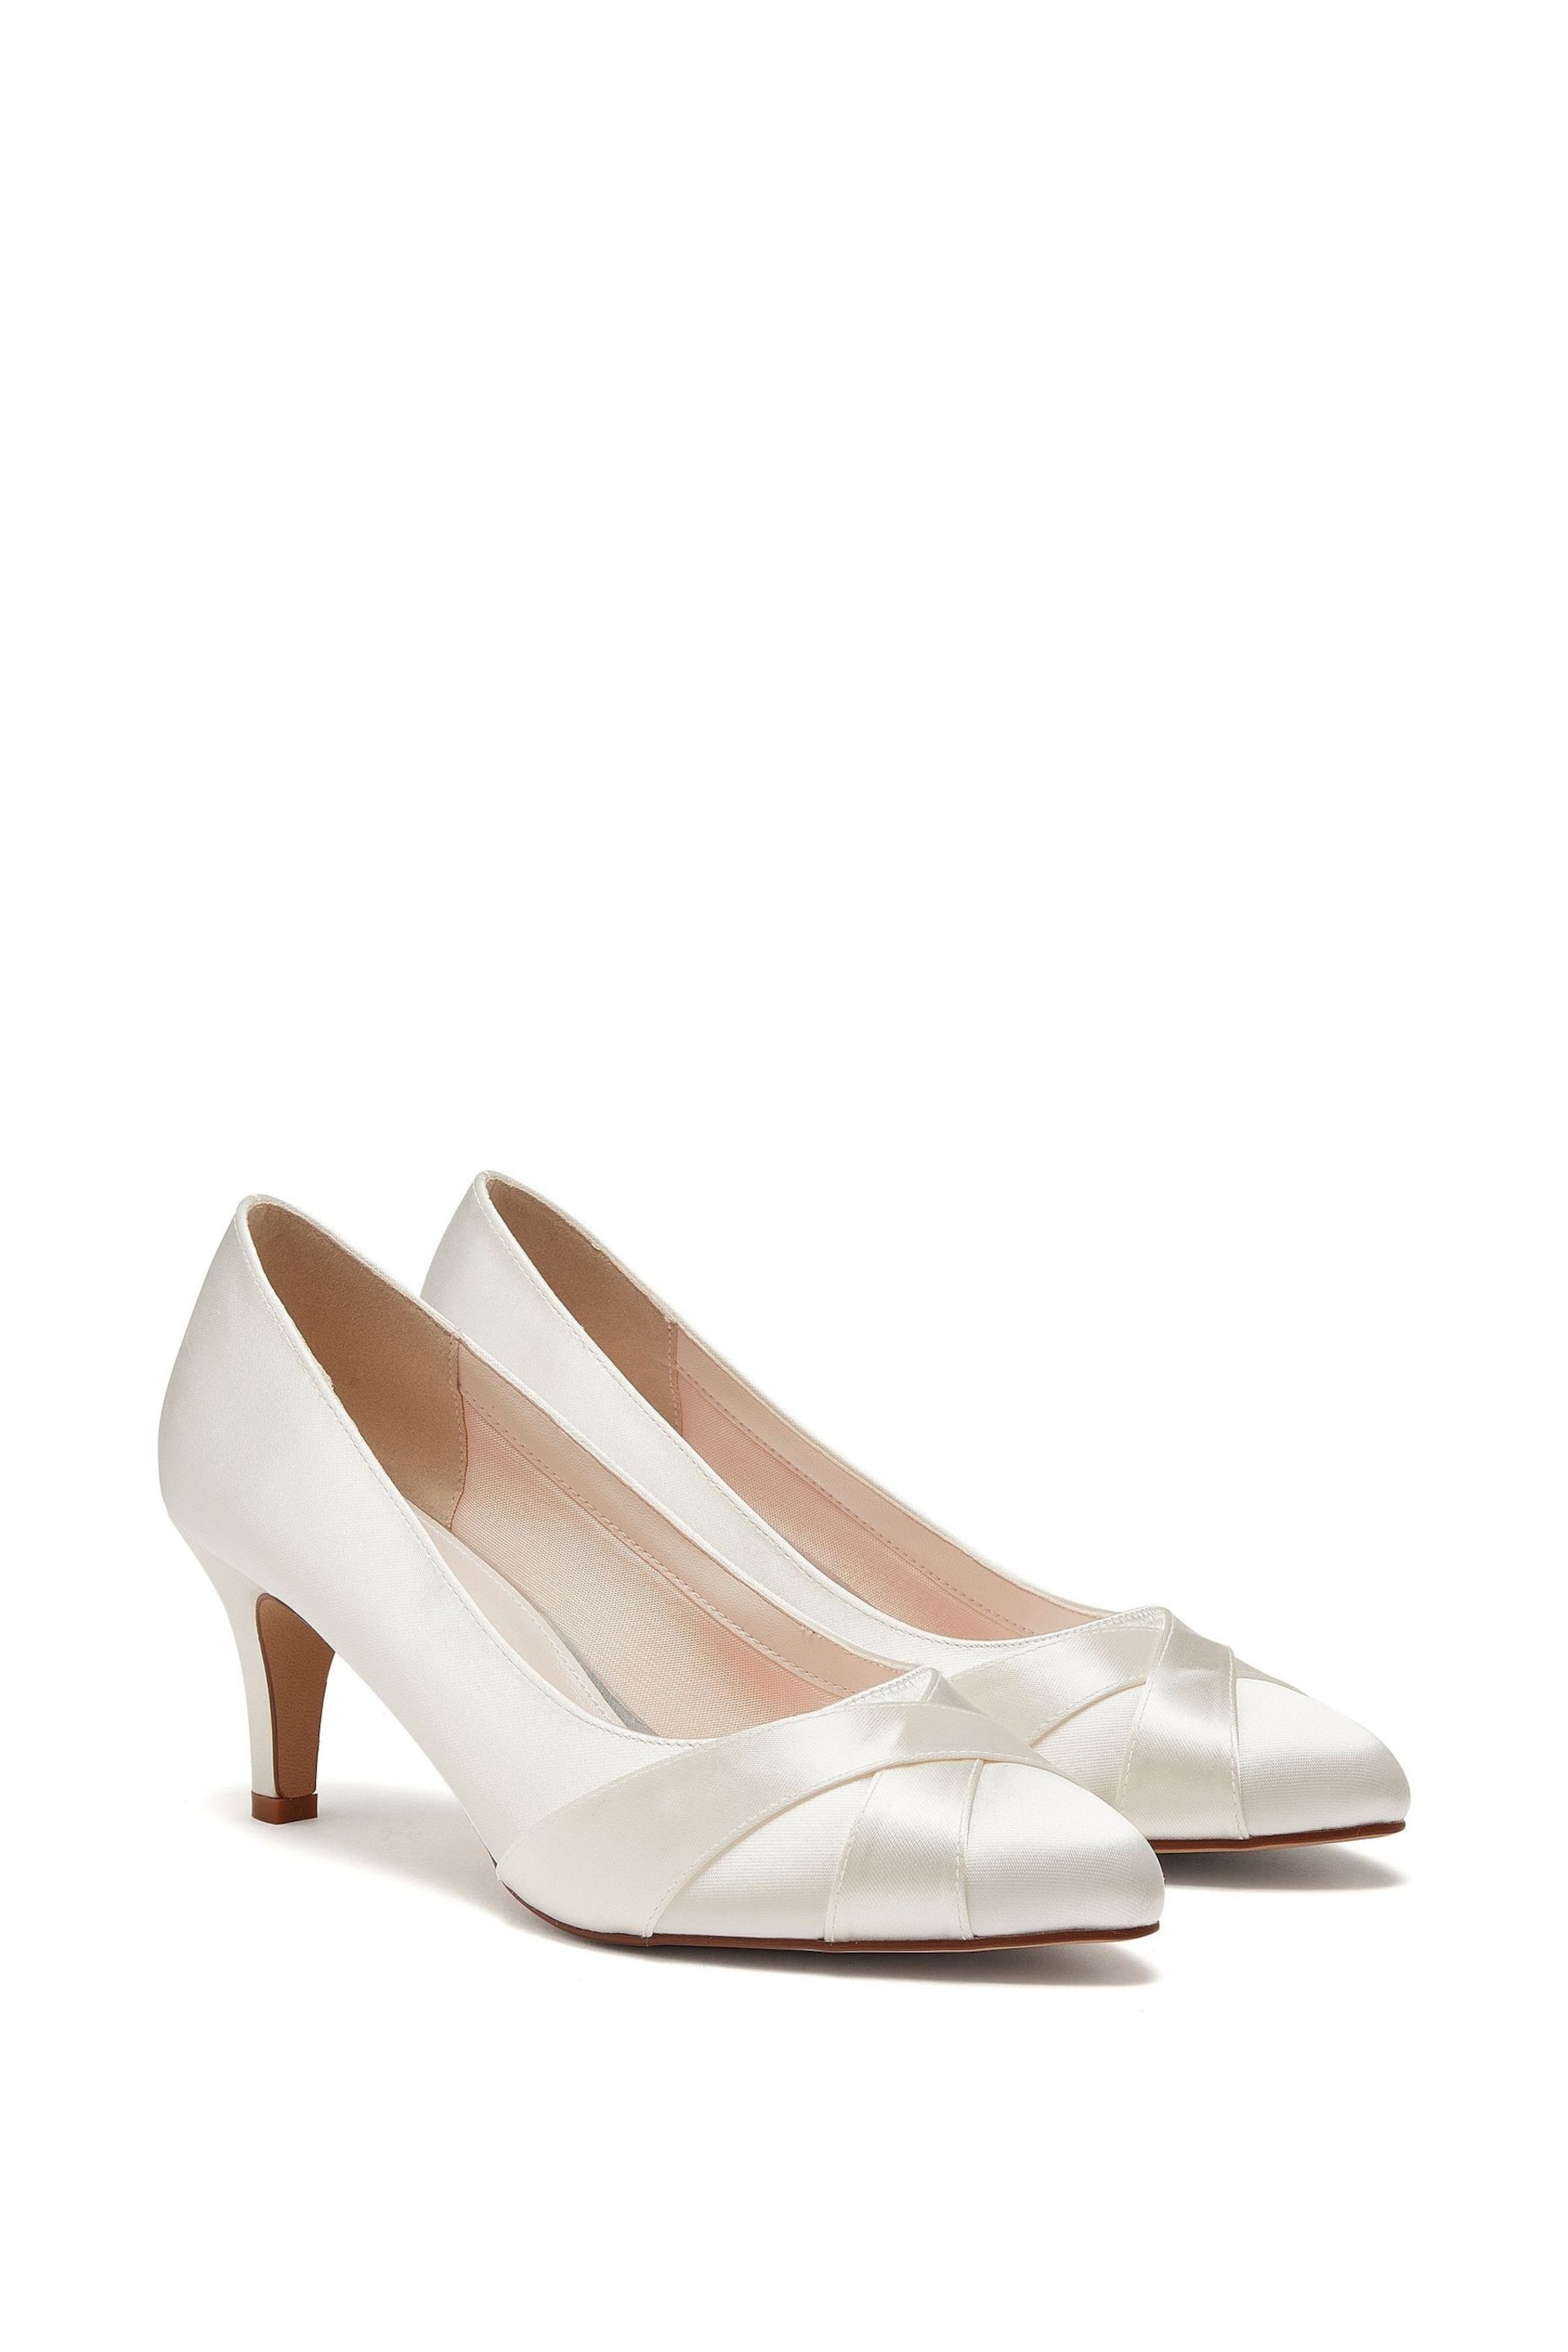 Rainbow Club Cream Bridal Lexi Wide Fit Satin Wedding Court Shoes - Image 2 of 4